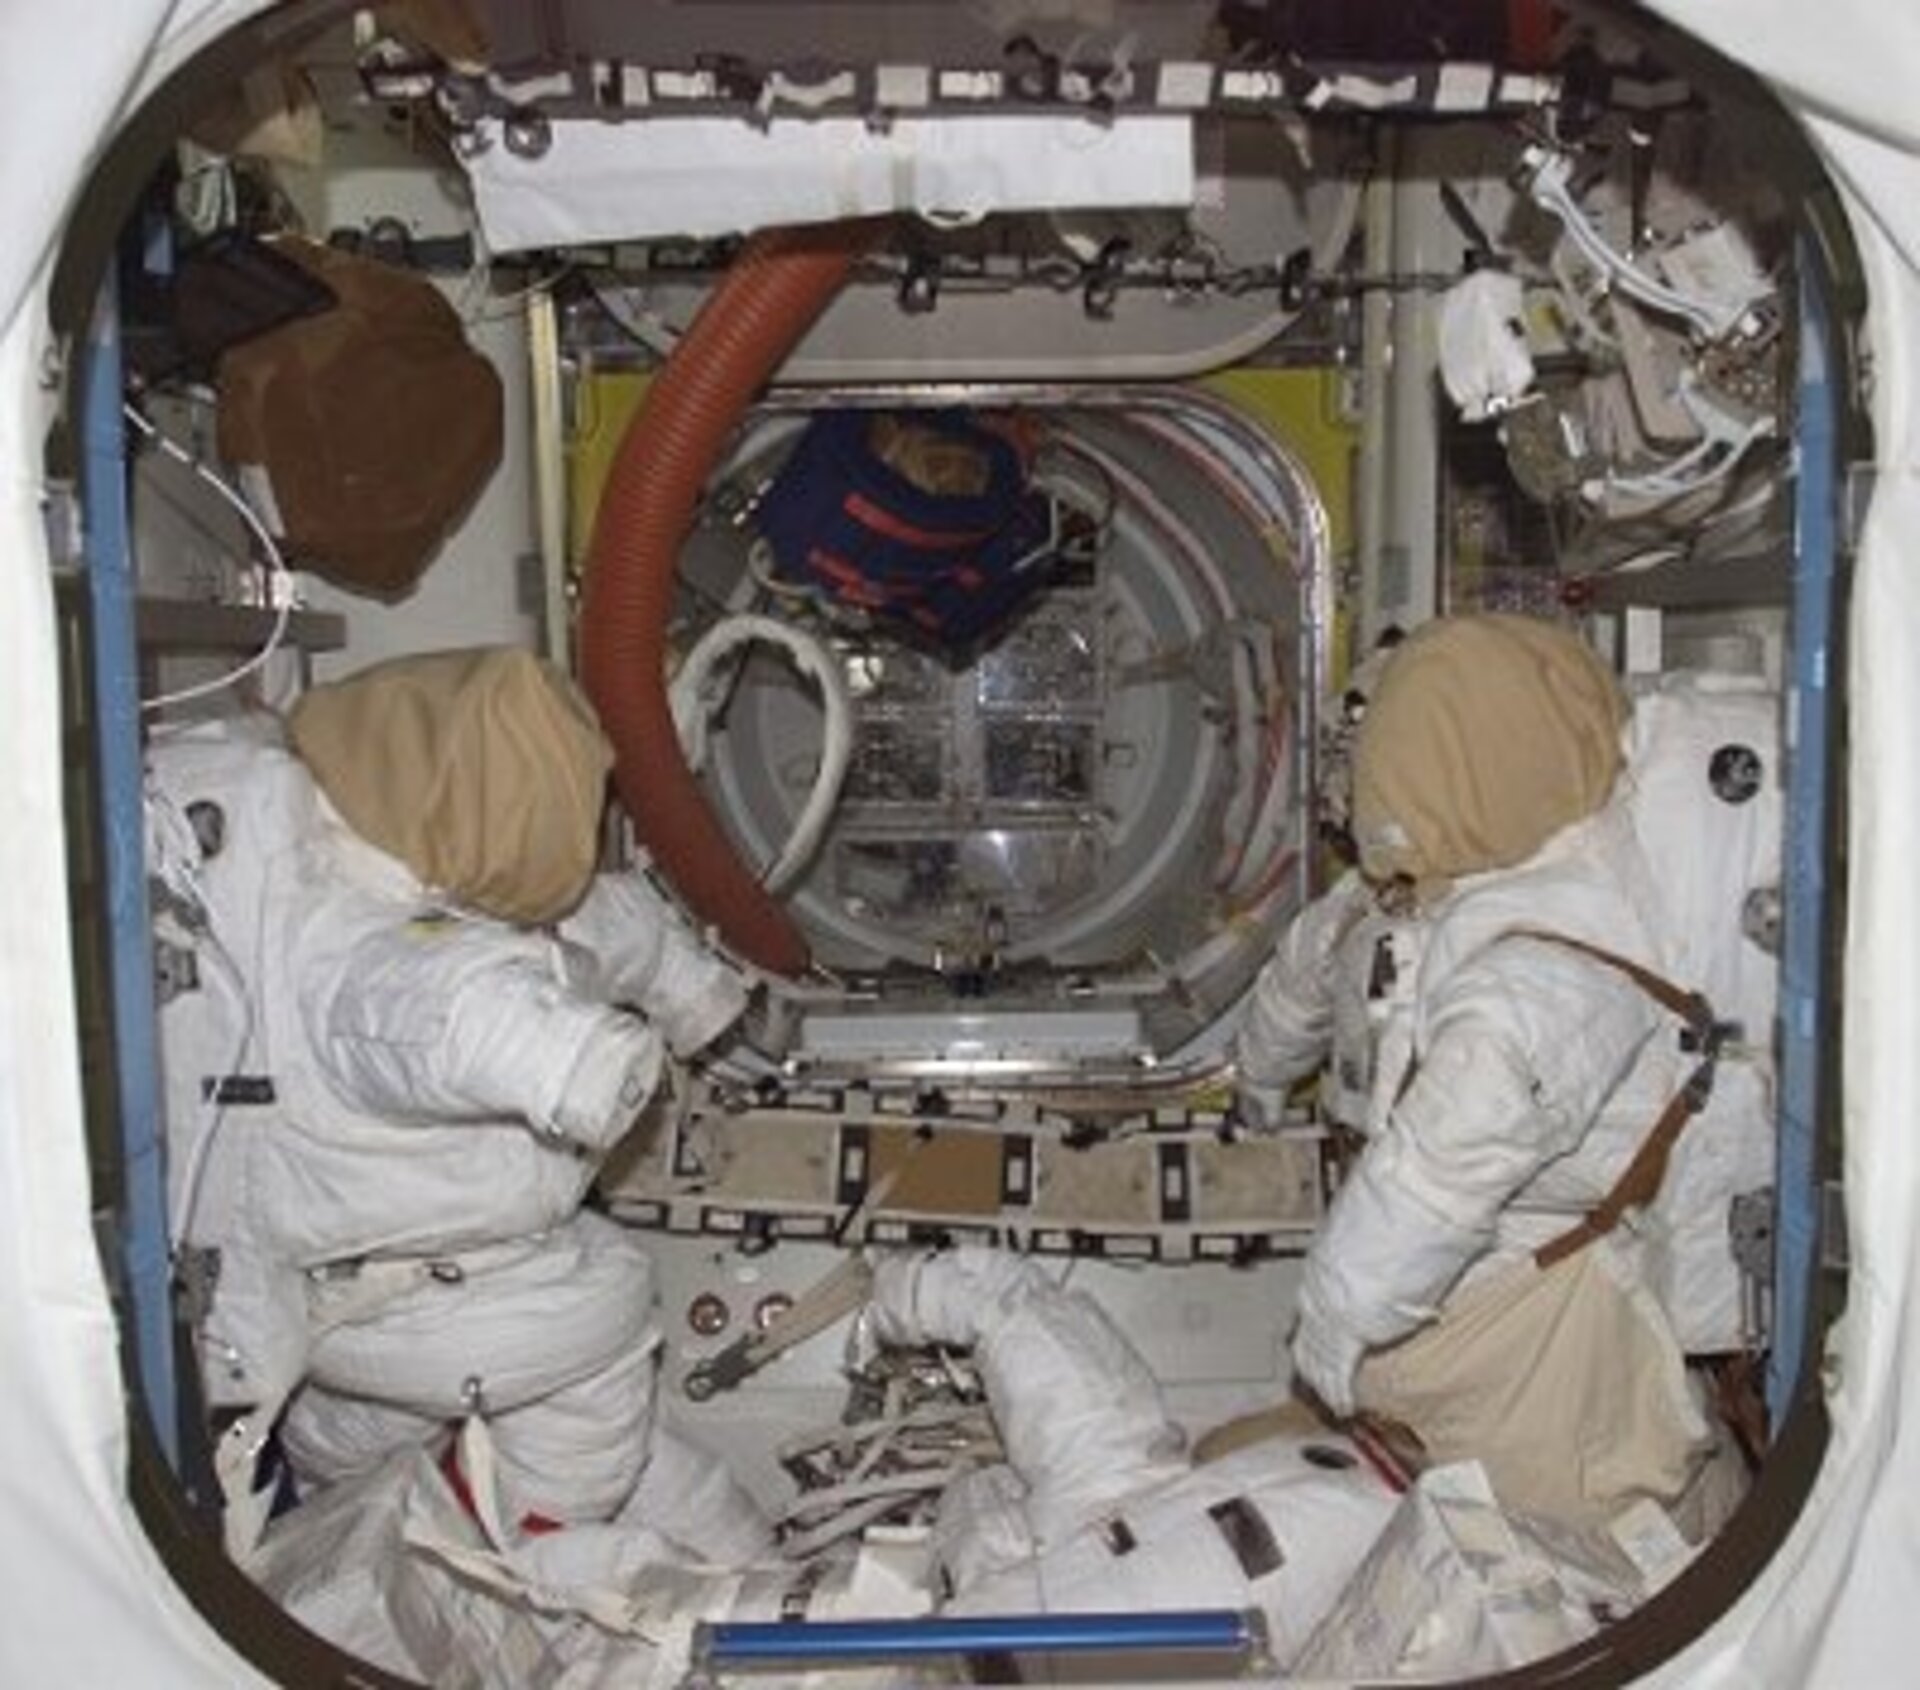 A view of the Quest Joint Airlock - the US EVA spacesuits, like those to be worn by Reiter and Williams on 3 August, are seen to the left and right